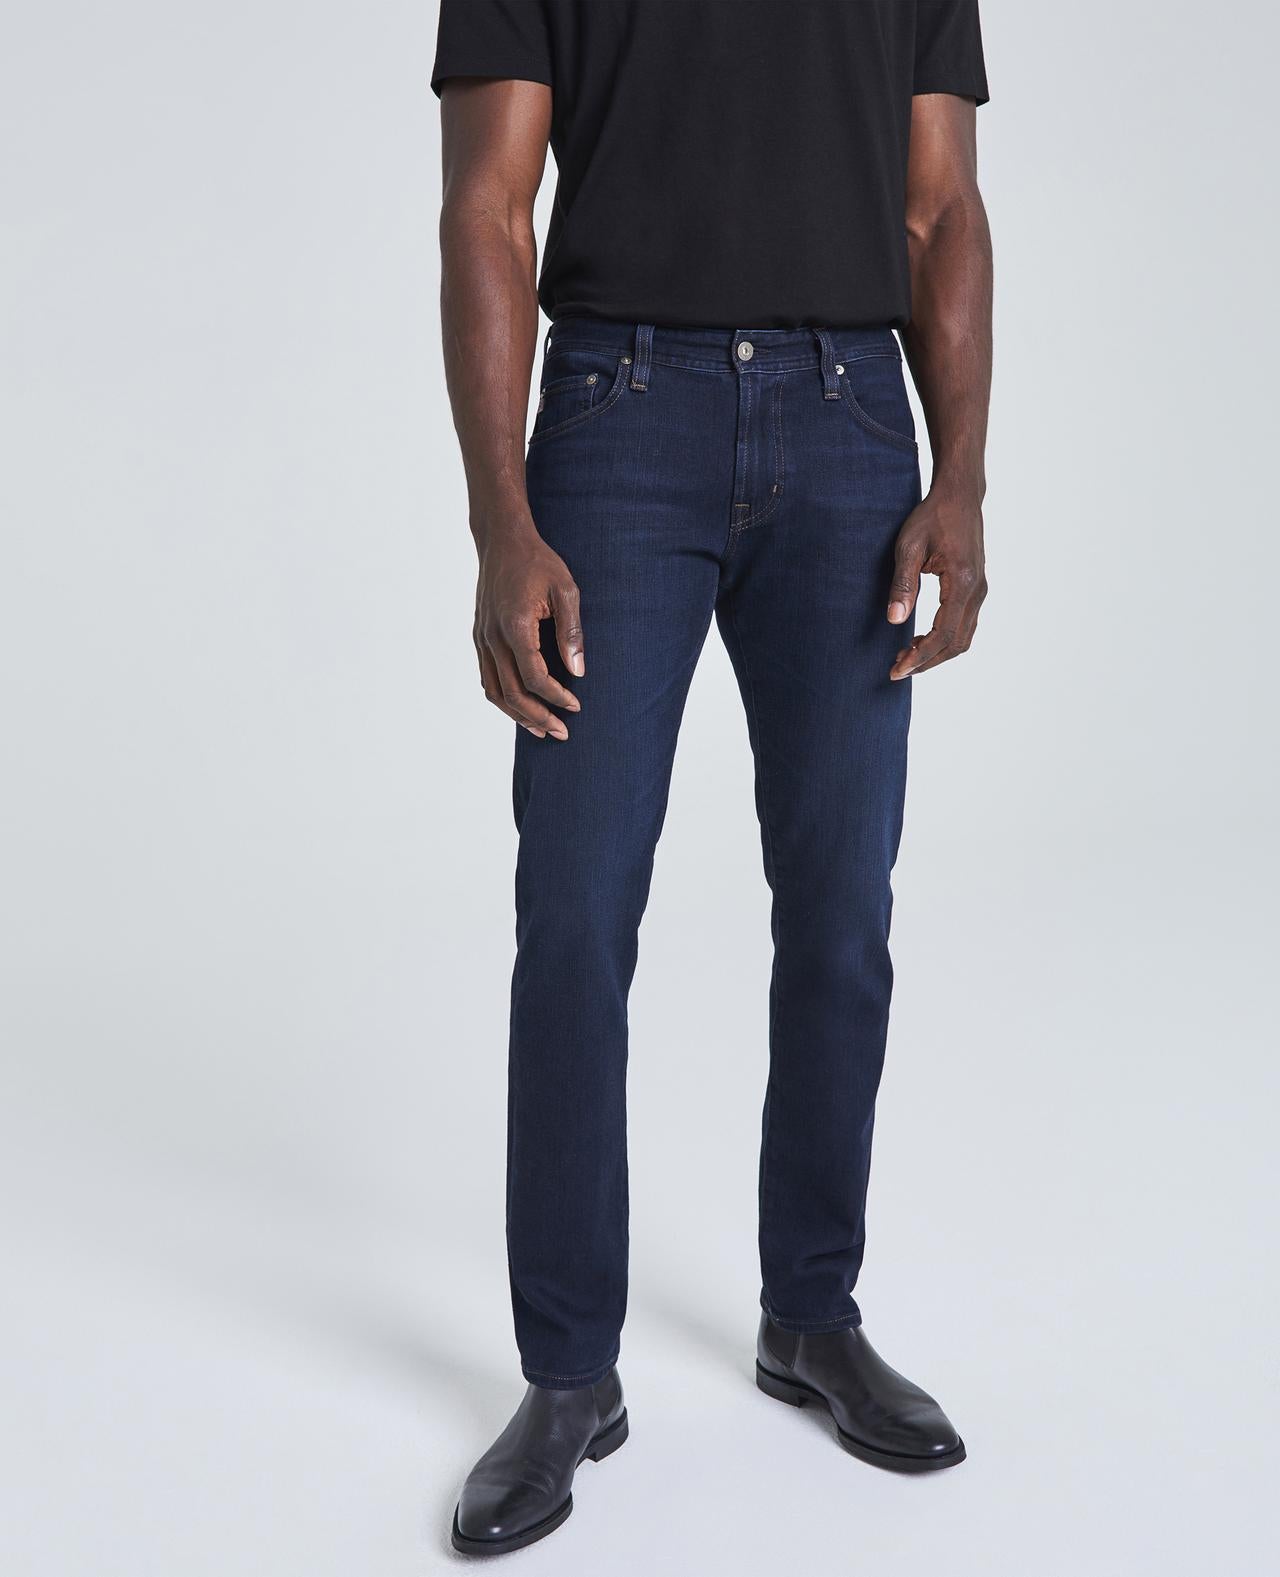 AG The Tellis Jeans in Scout - Boutique